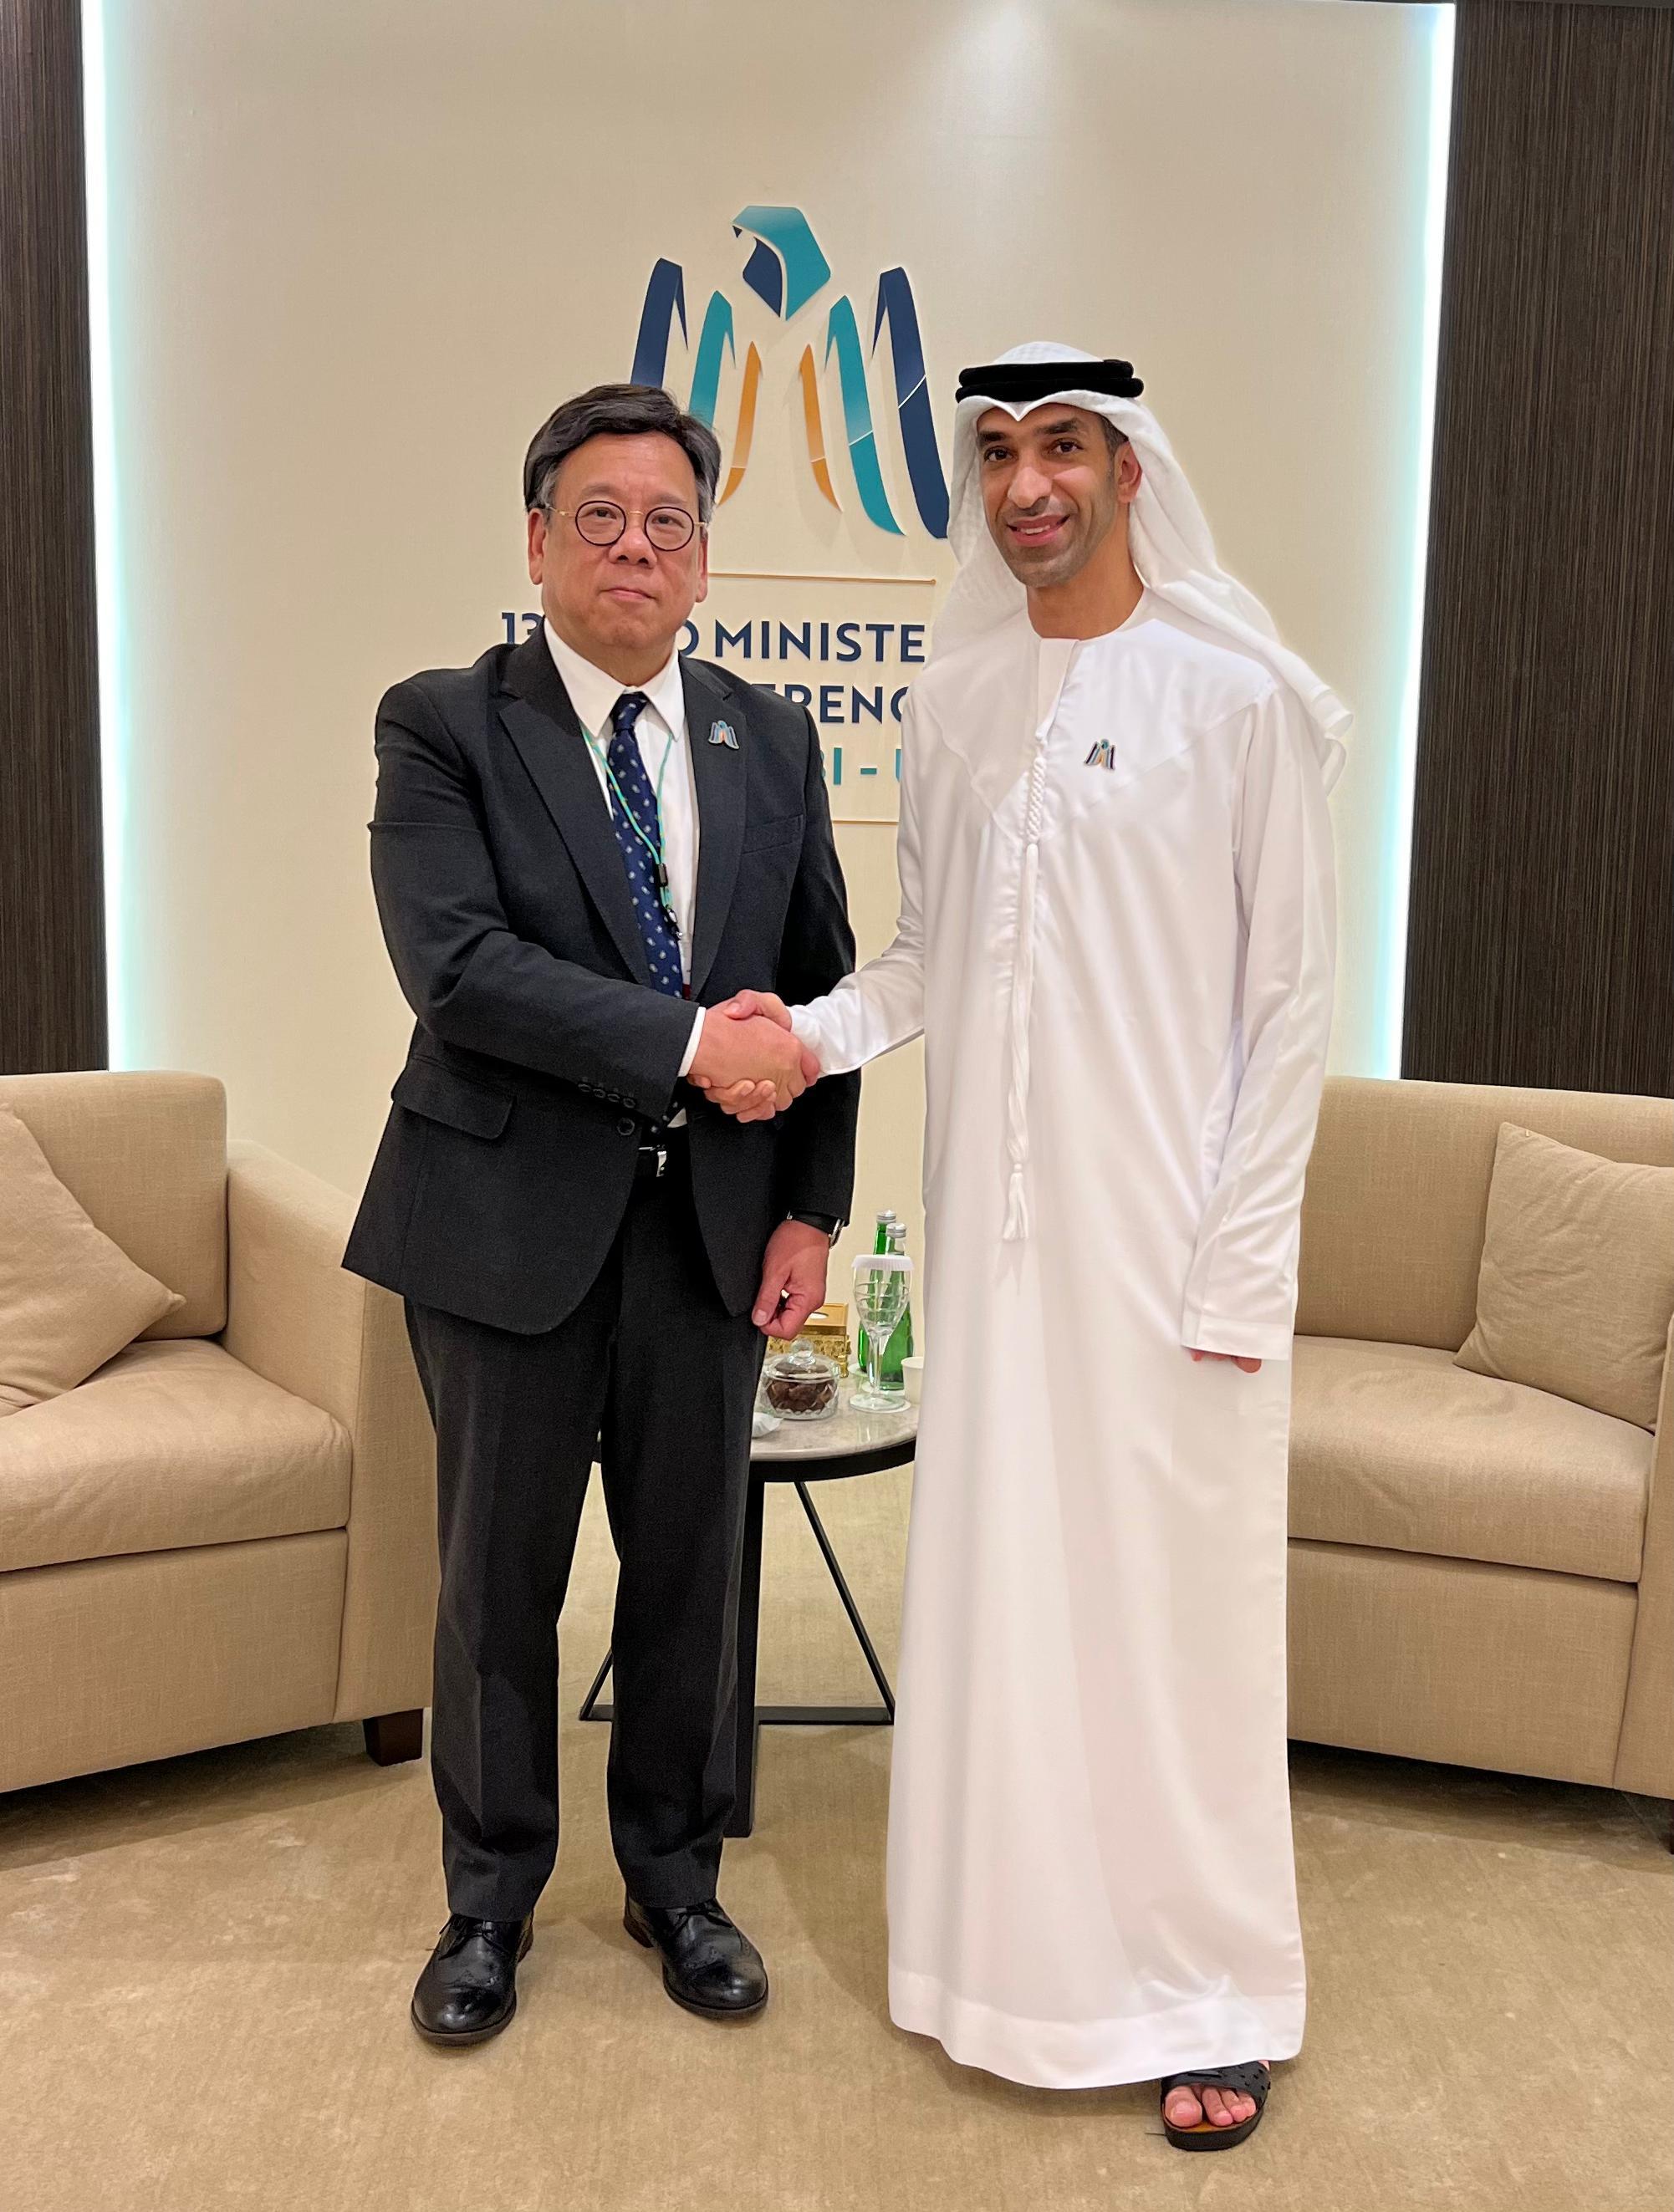 The Secretary for Commerce and Economic Development, Mr Algernon Yau (left), meets with the Minister of State for Foreign Trade of the United Arab Emirates (UAE), Dr Thani bin Ahmed Al Zeyoudi (right), on the sidelines of the 13th World Trade Organization Ministerial Conference in Abu Dhabi, the UAE, on February 25 (Abu Dhabi time) to exchange views on issues of mutual interest.